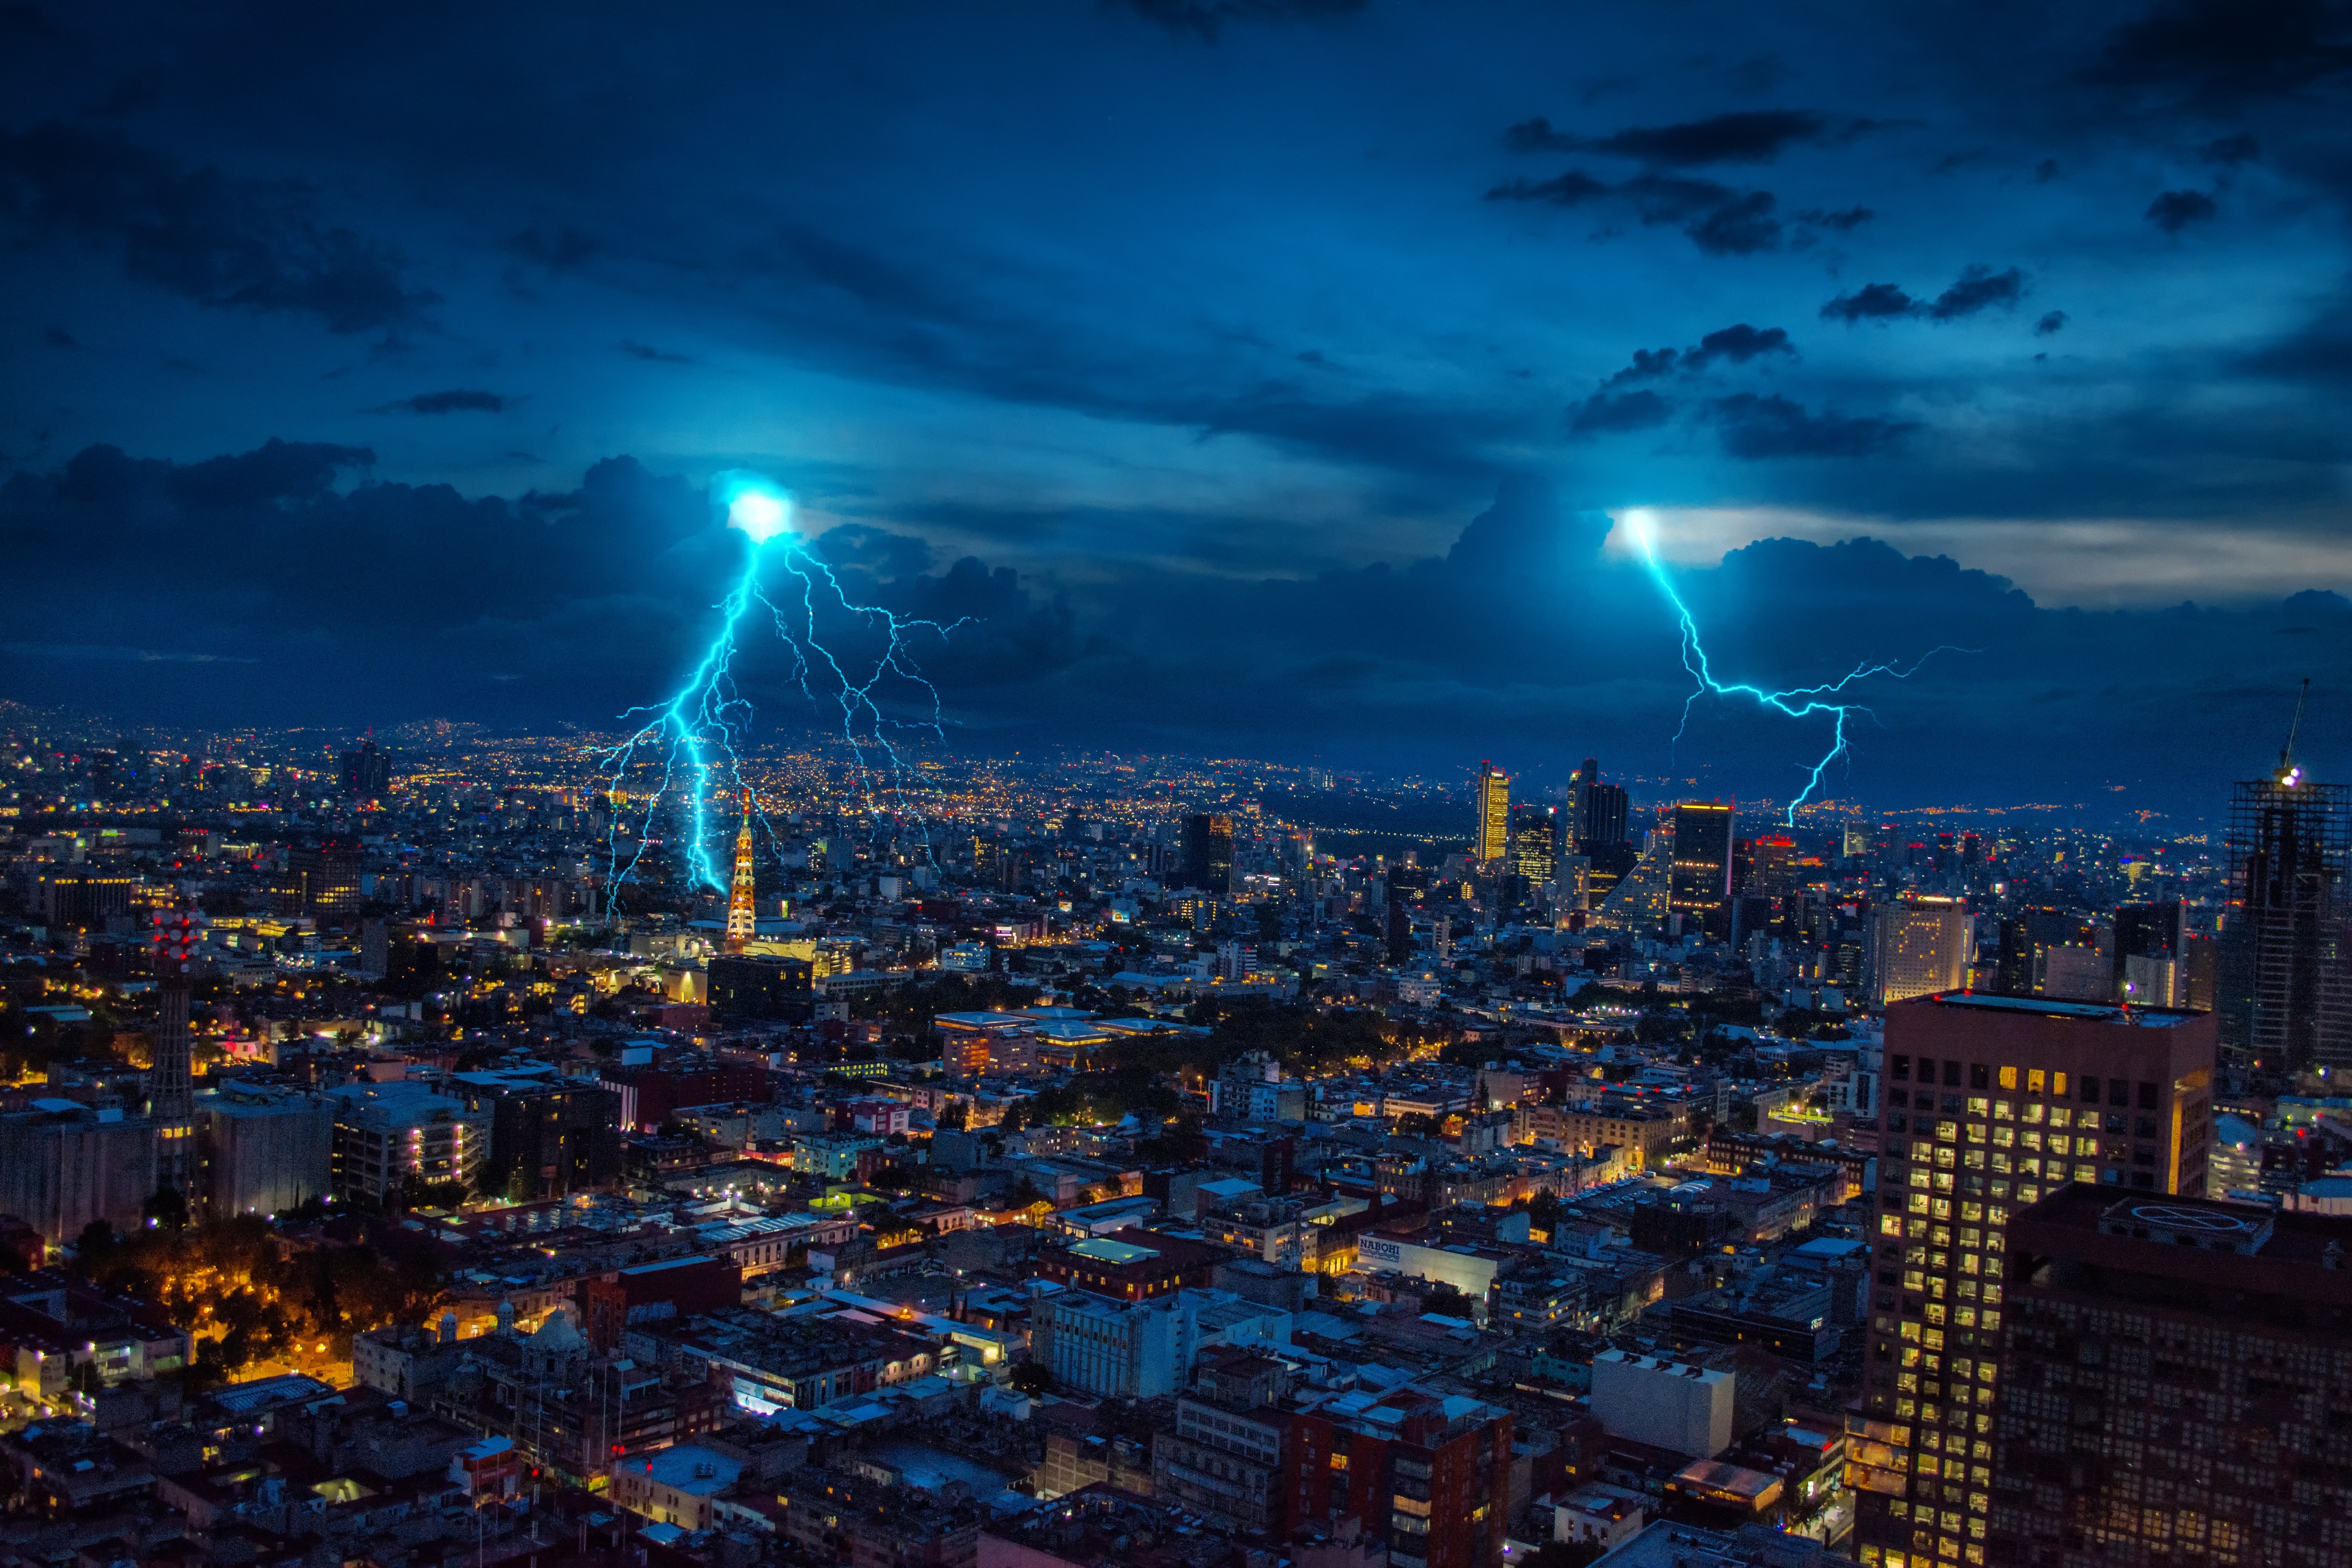 79223 download wallpaper cities, night, lightning, city, lights, sparks screensavers and pictures for free